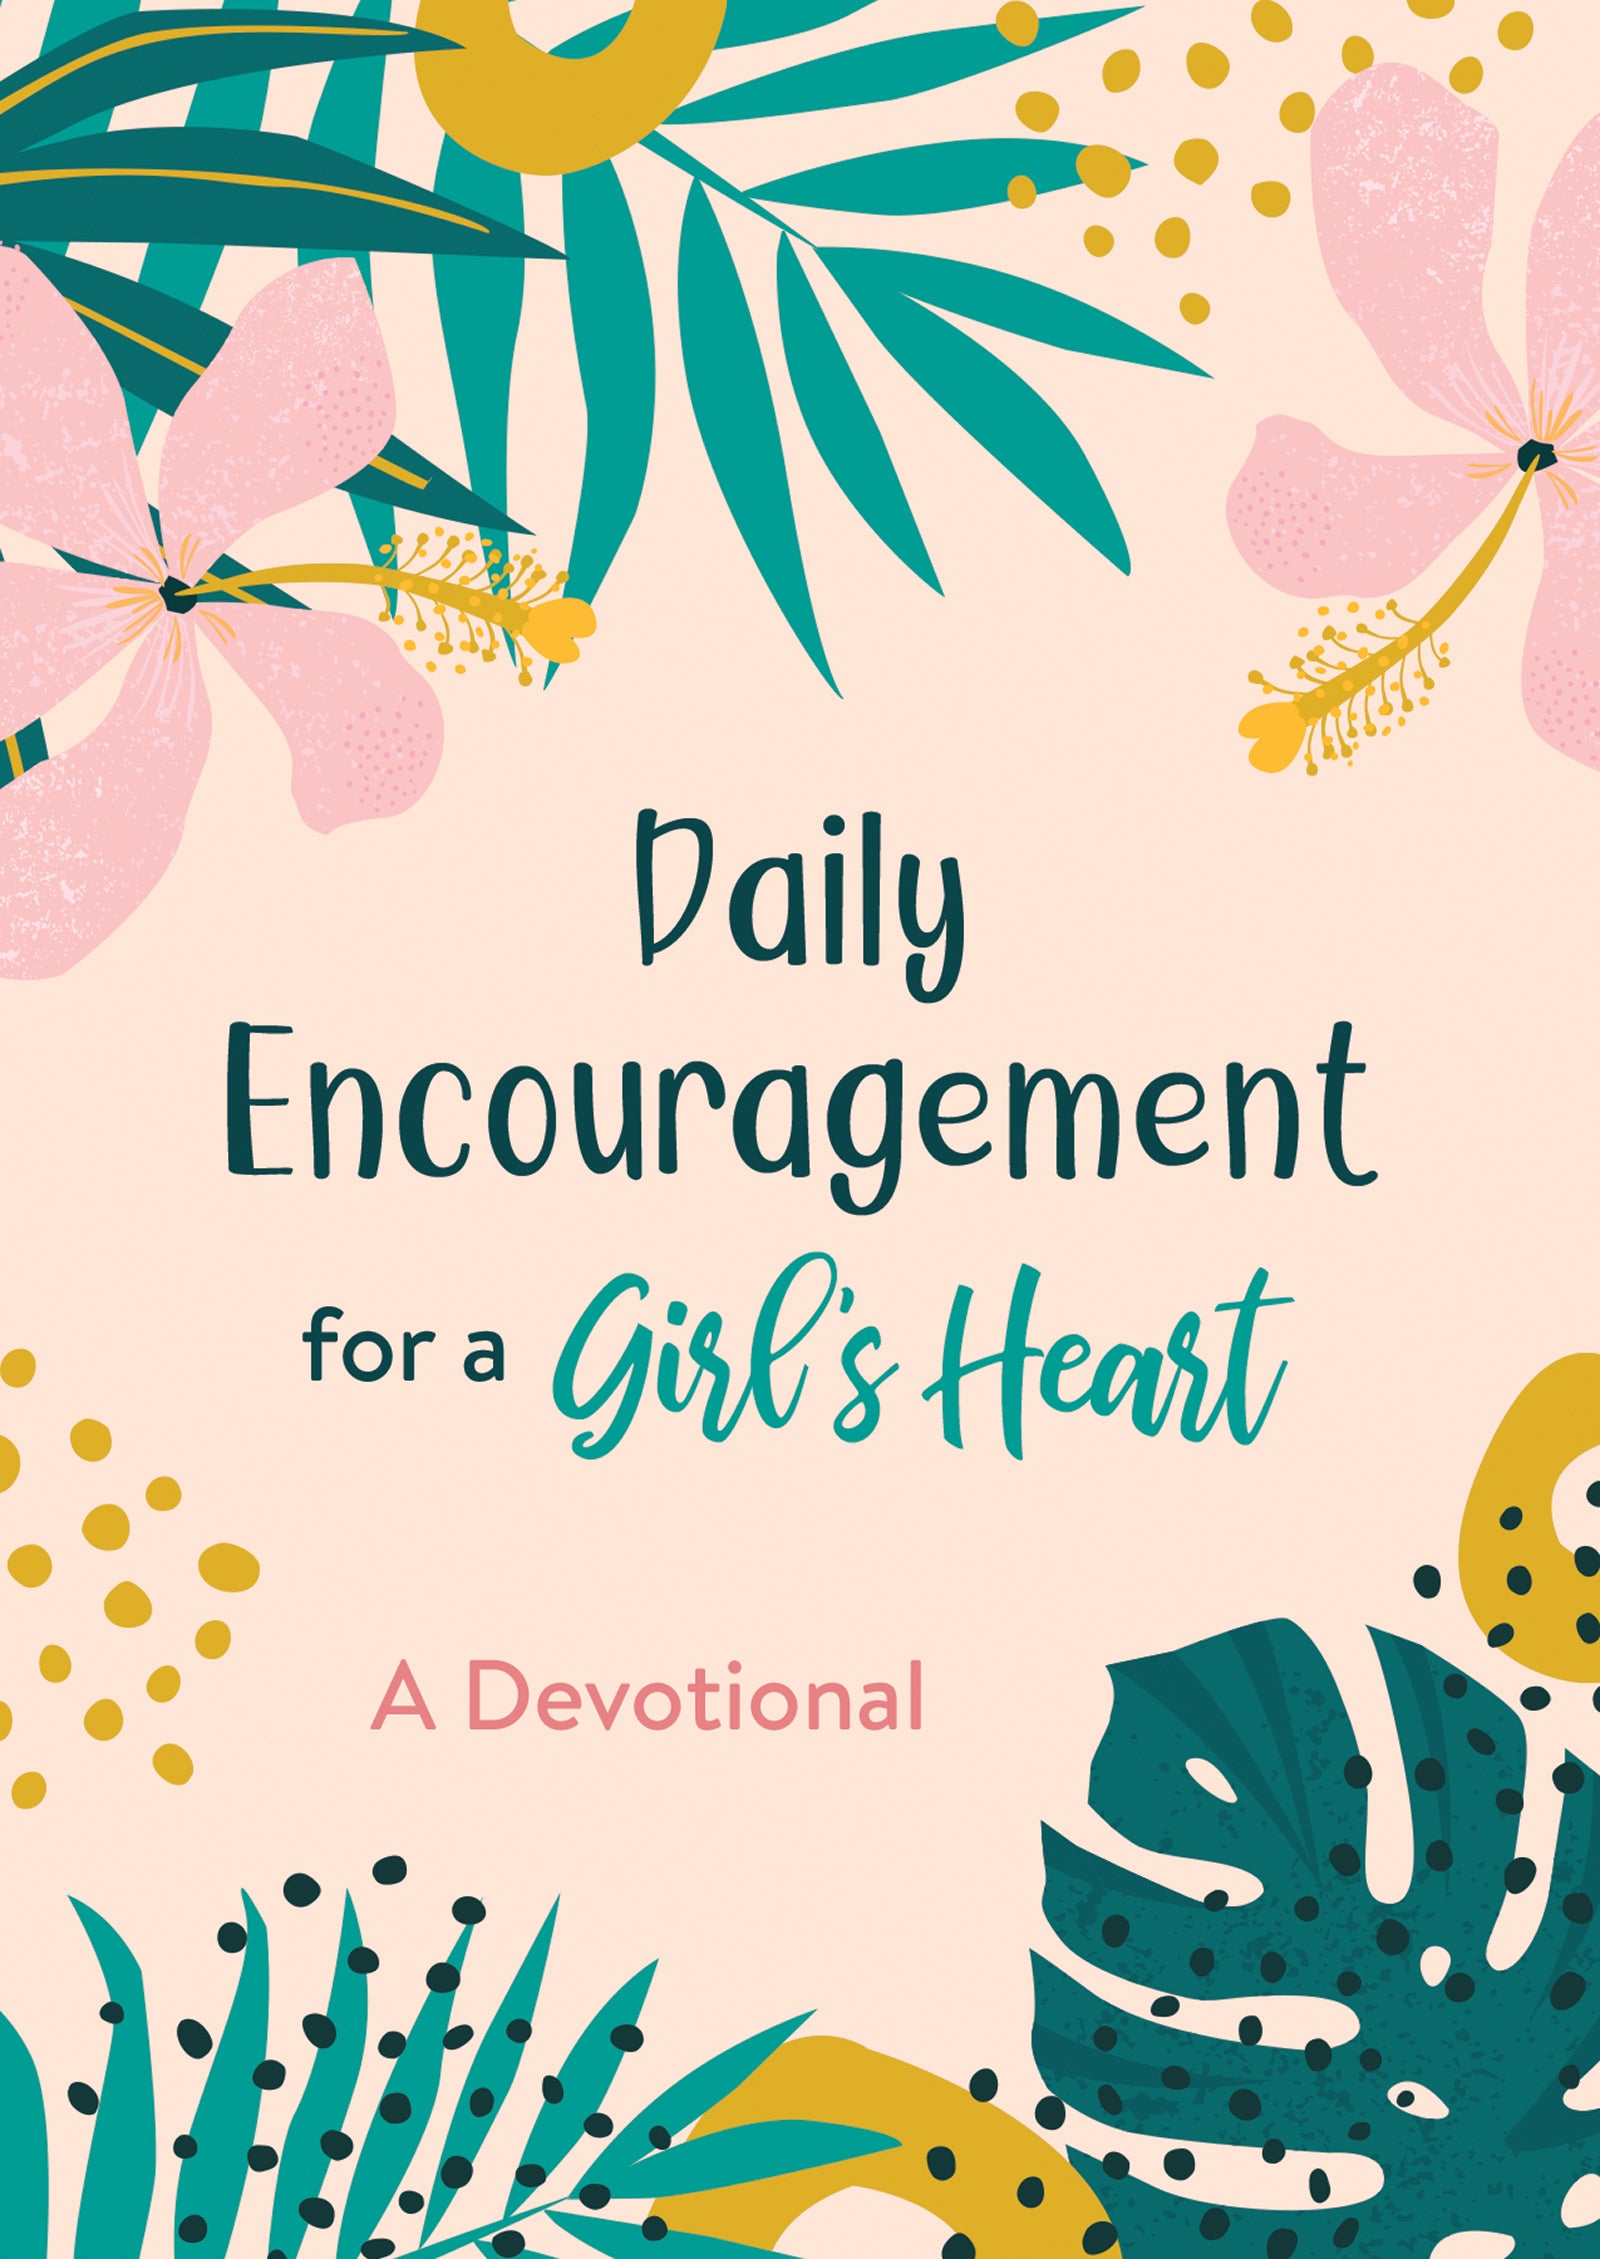 Daily Encouragement for a Girl's Heart - The Christian Gift Company